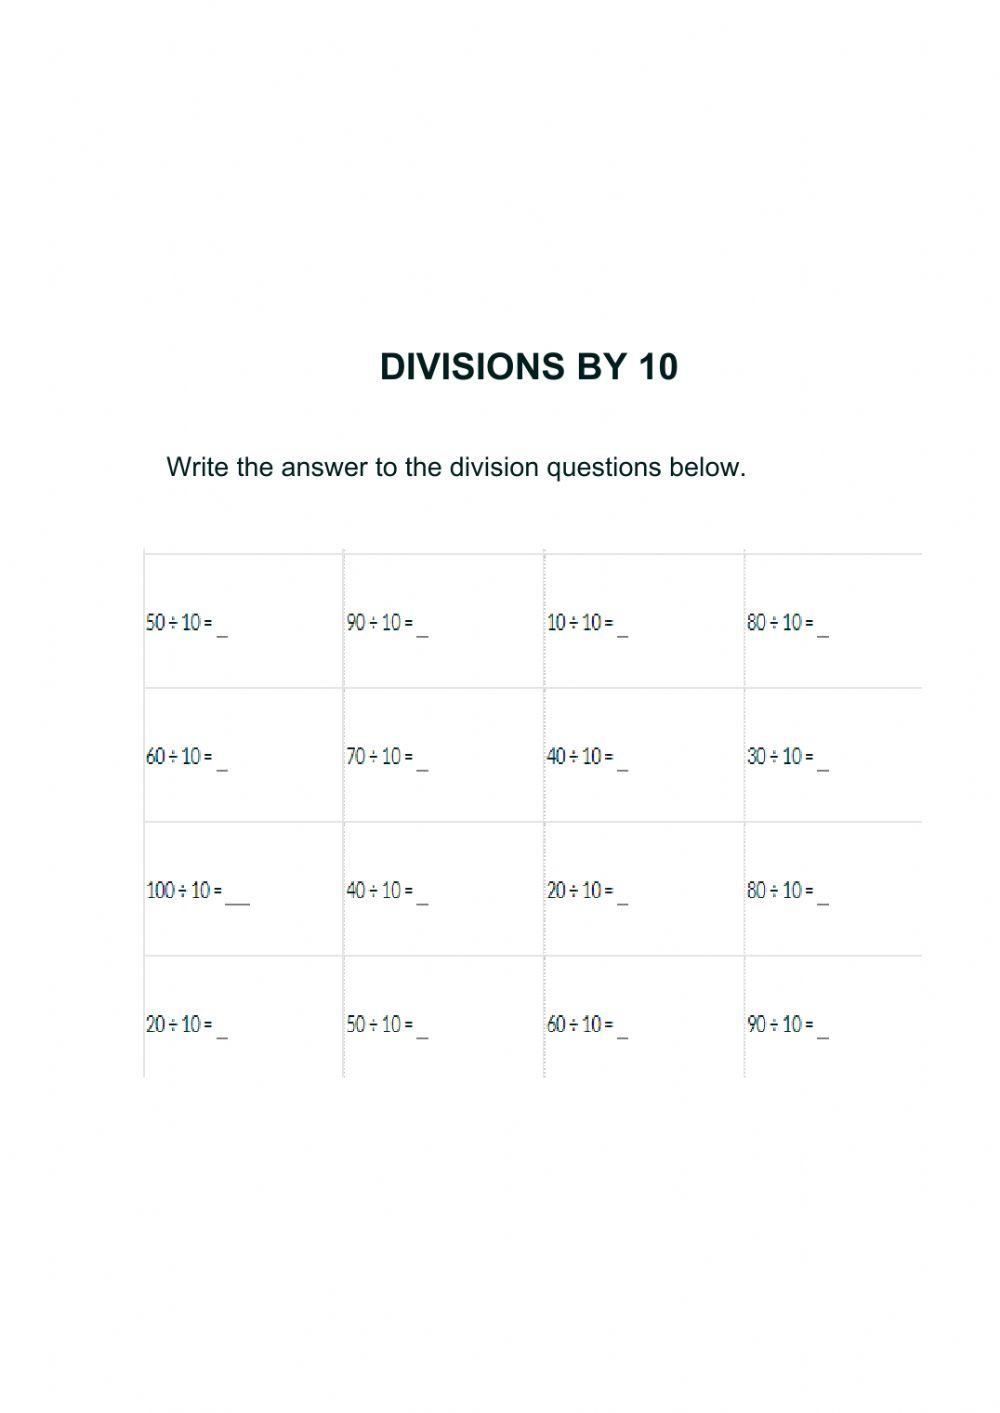 Divisions by 10